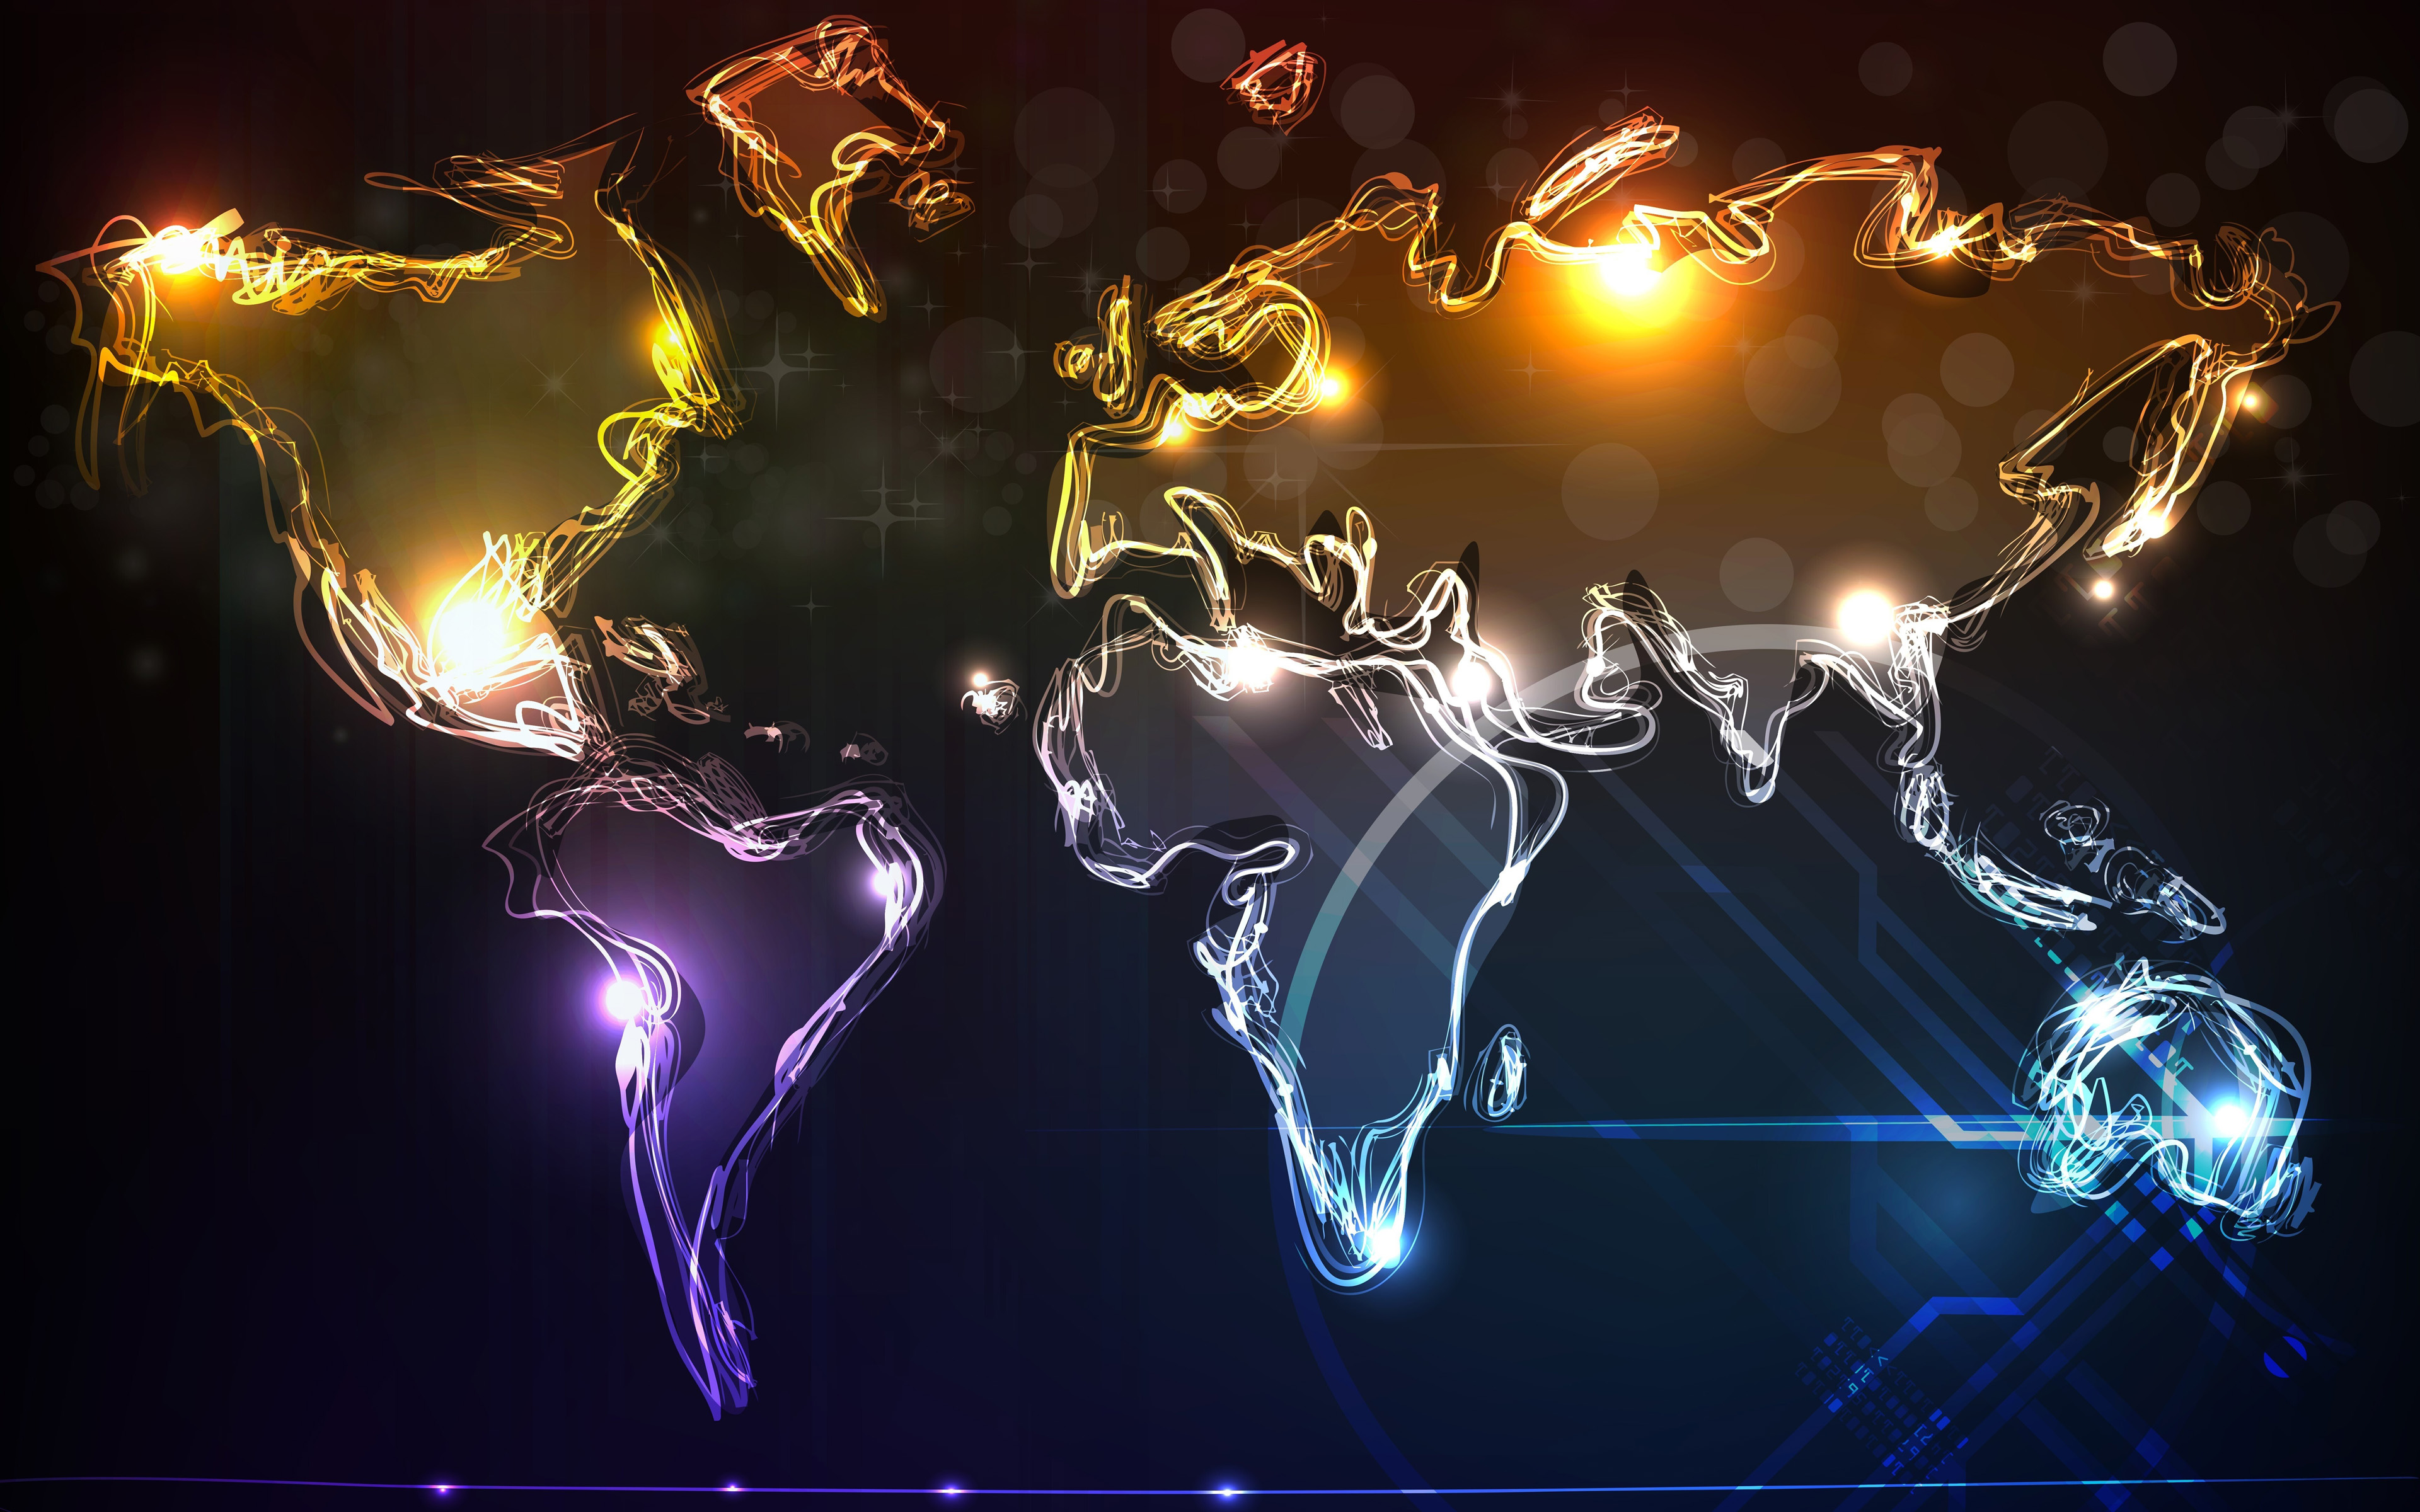 Download wallpapers Neon World map, 4k, abstract art, neon lights,  creative, Glass World map, travel concepts, World map concepts, 3D World map,  World map for desktop with resolution 3840x2400. High Quality HD